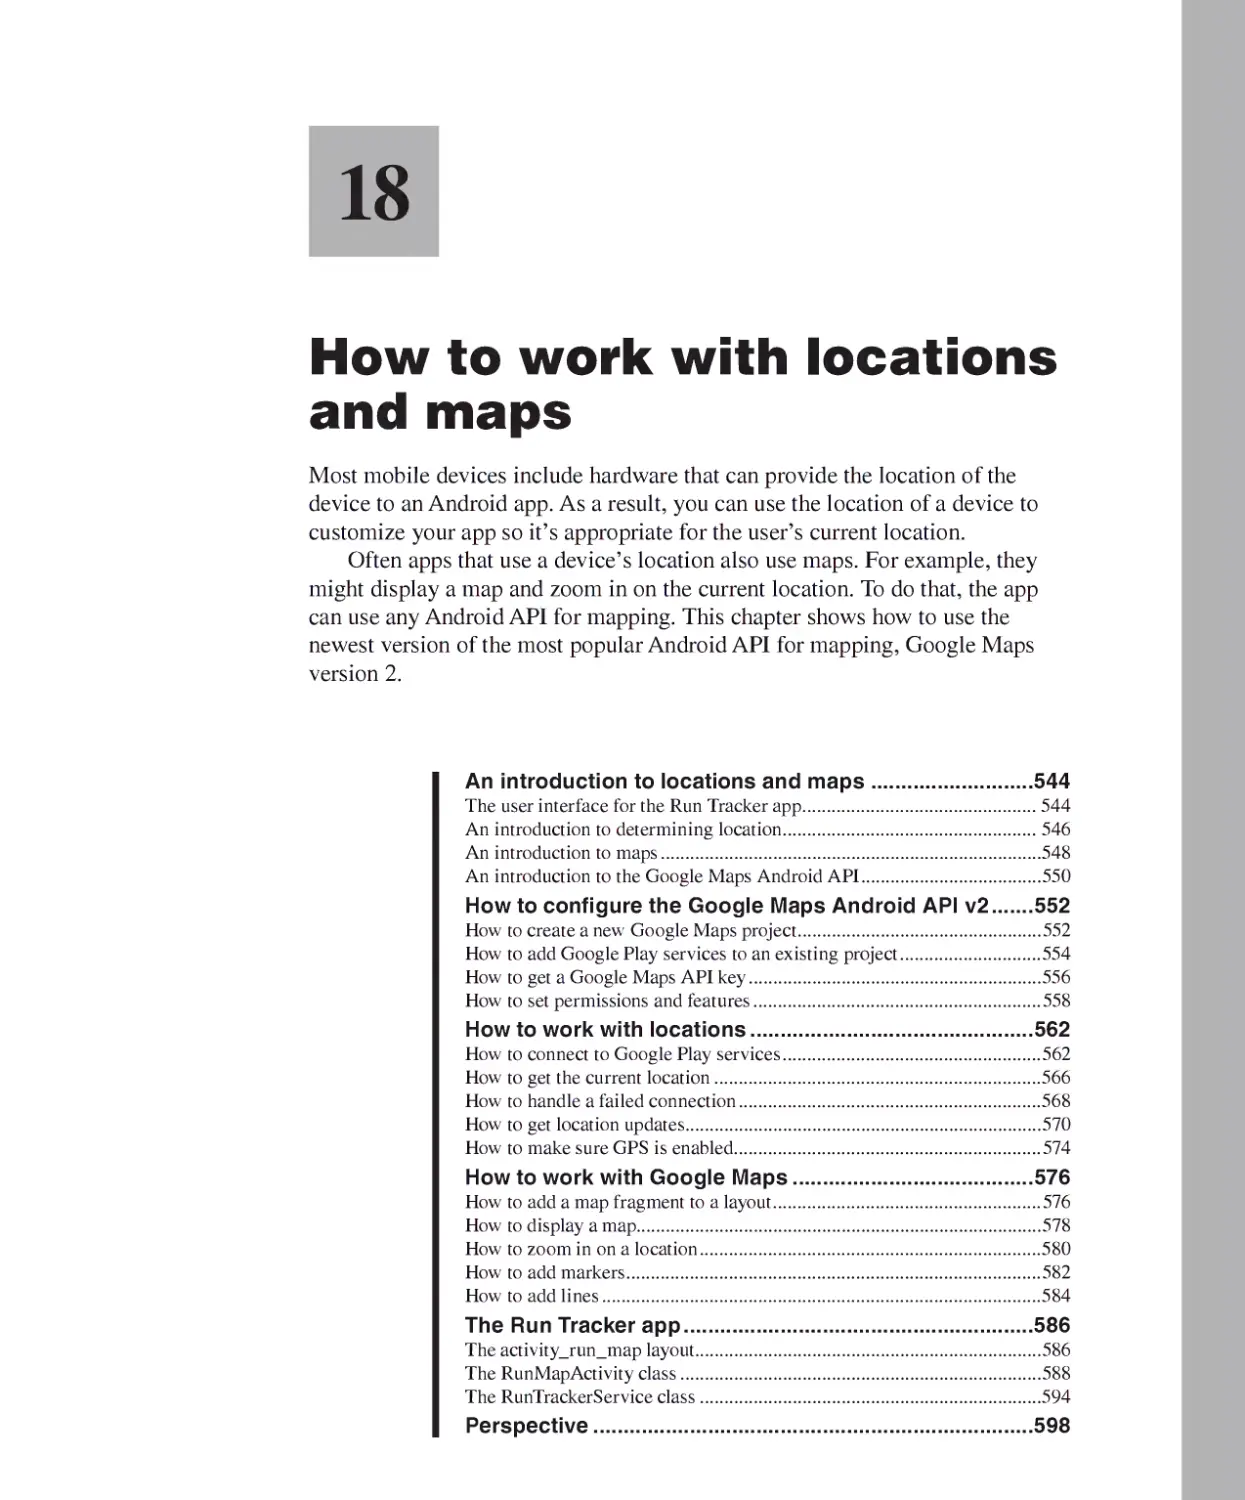 Chapter 18 - How to Work with Locations and Maps